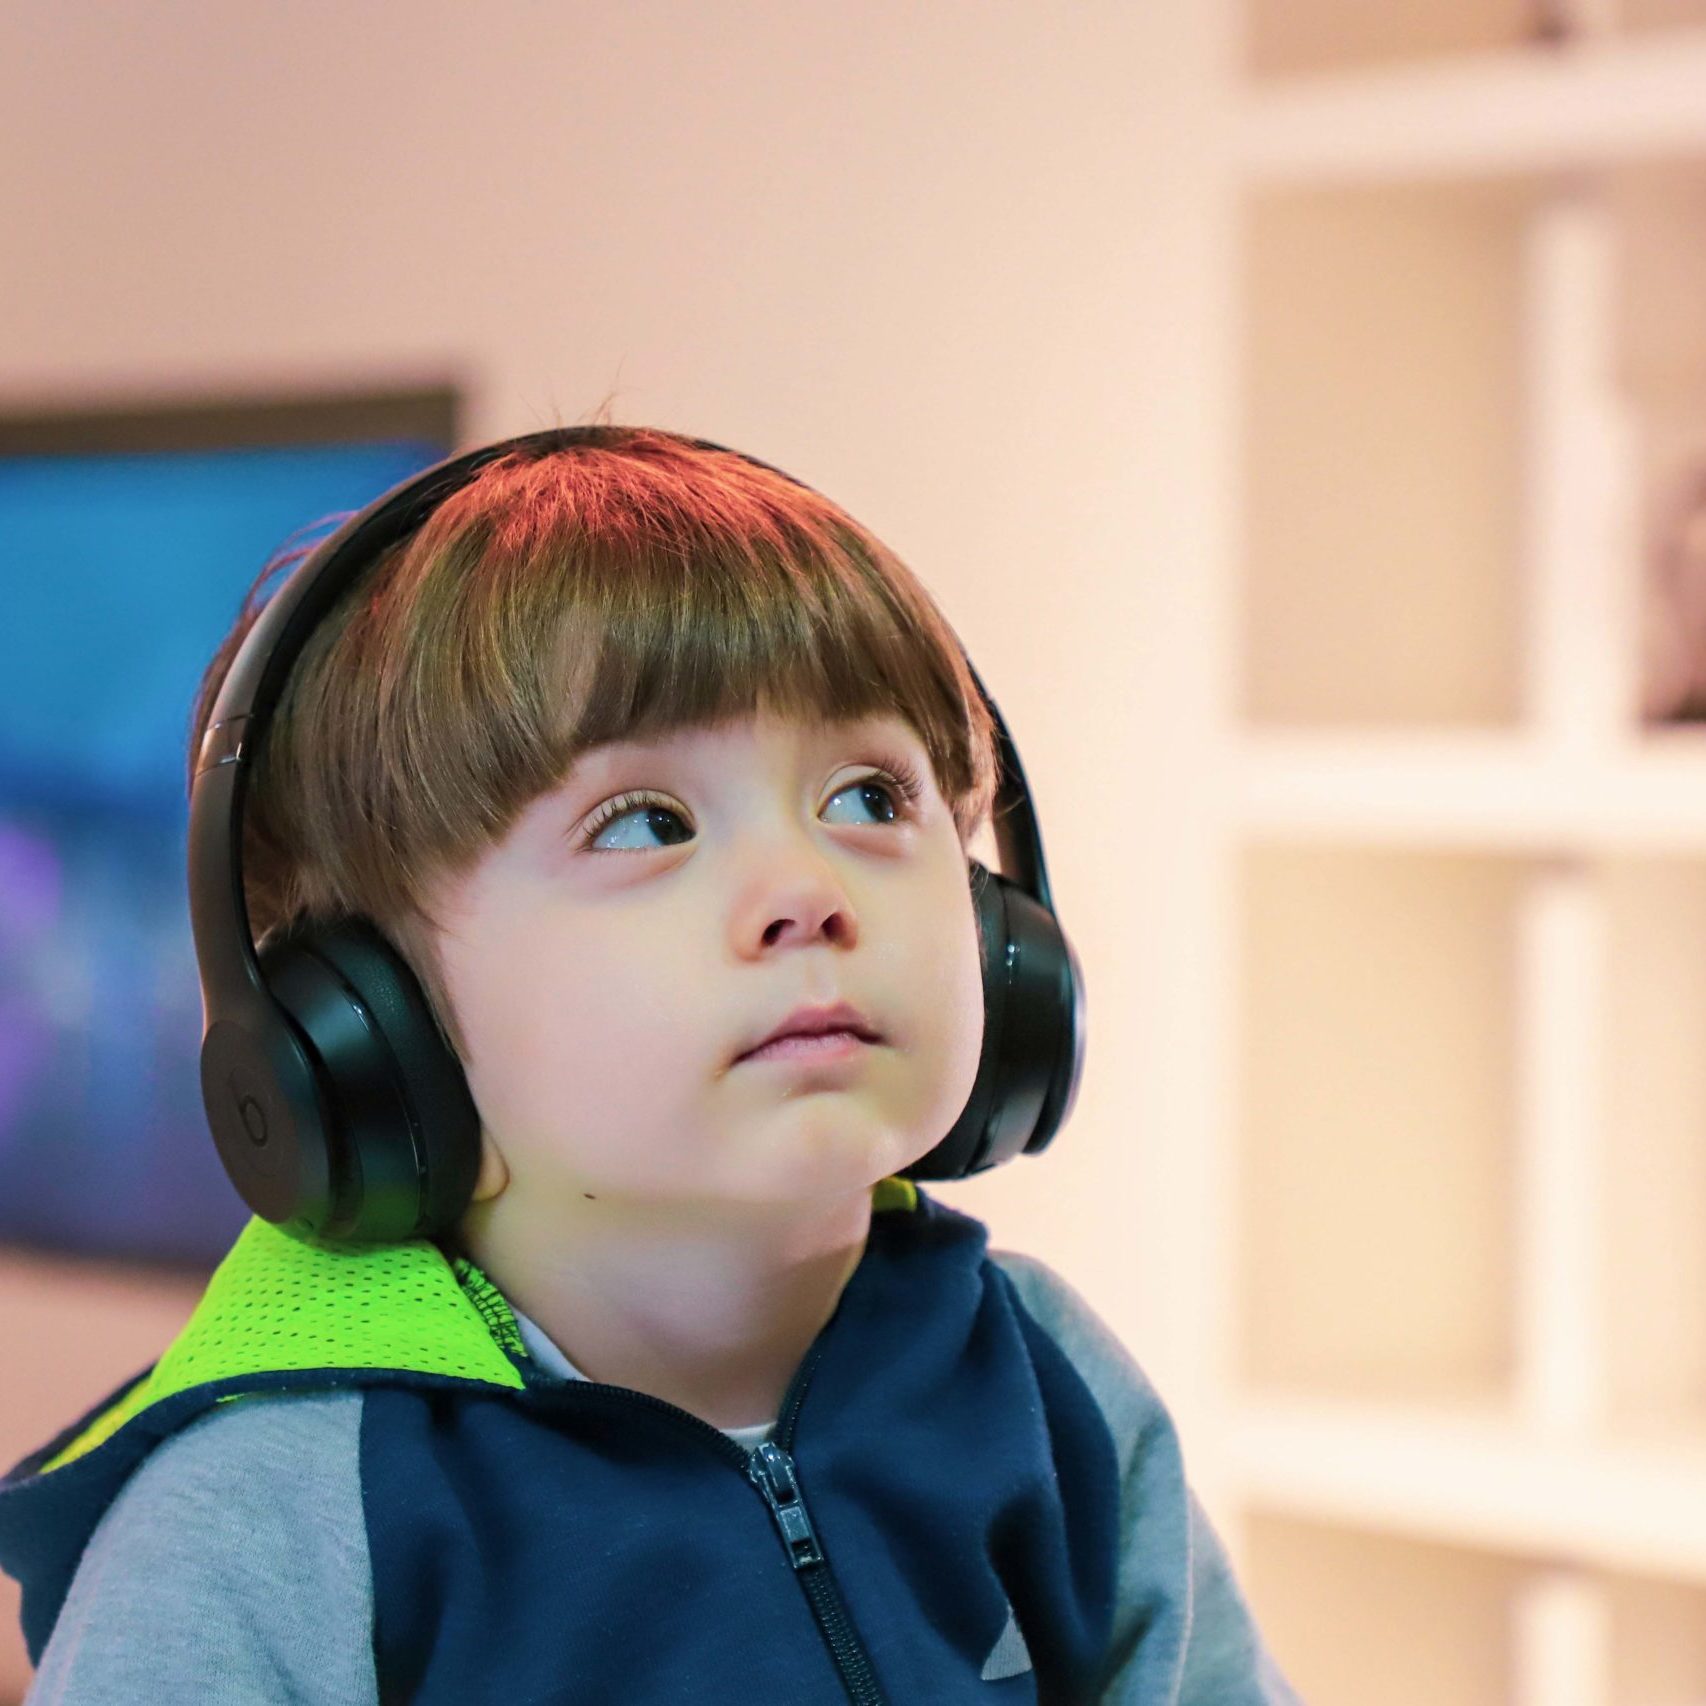 Child with assistive technology headphones.